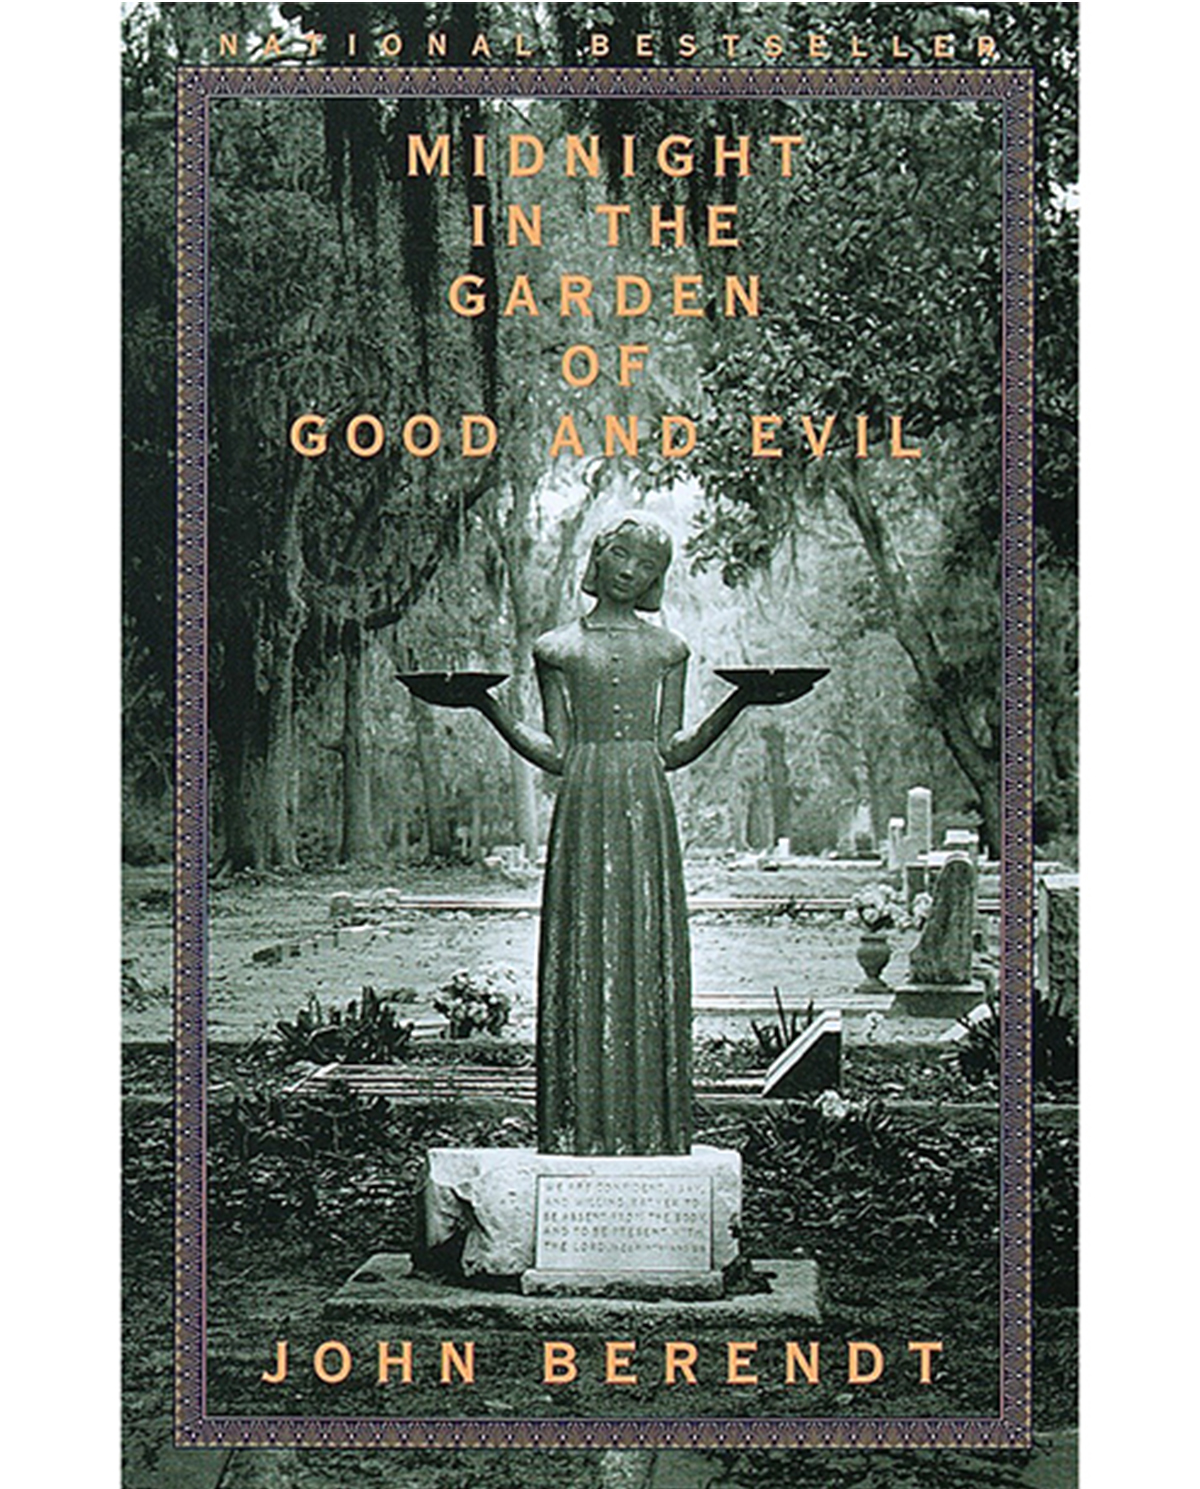 Midnight in the Garden of-Good and Evil by John Berendt at the Milford Readers and Writers Festival